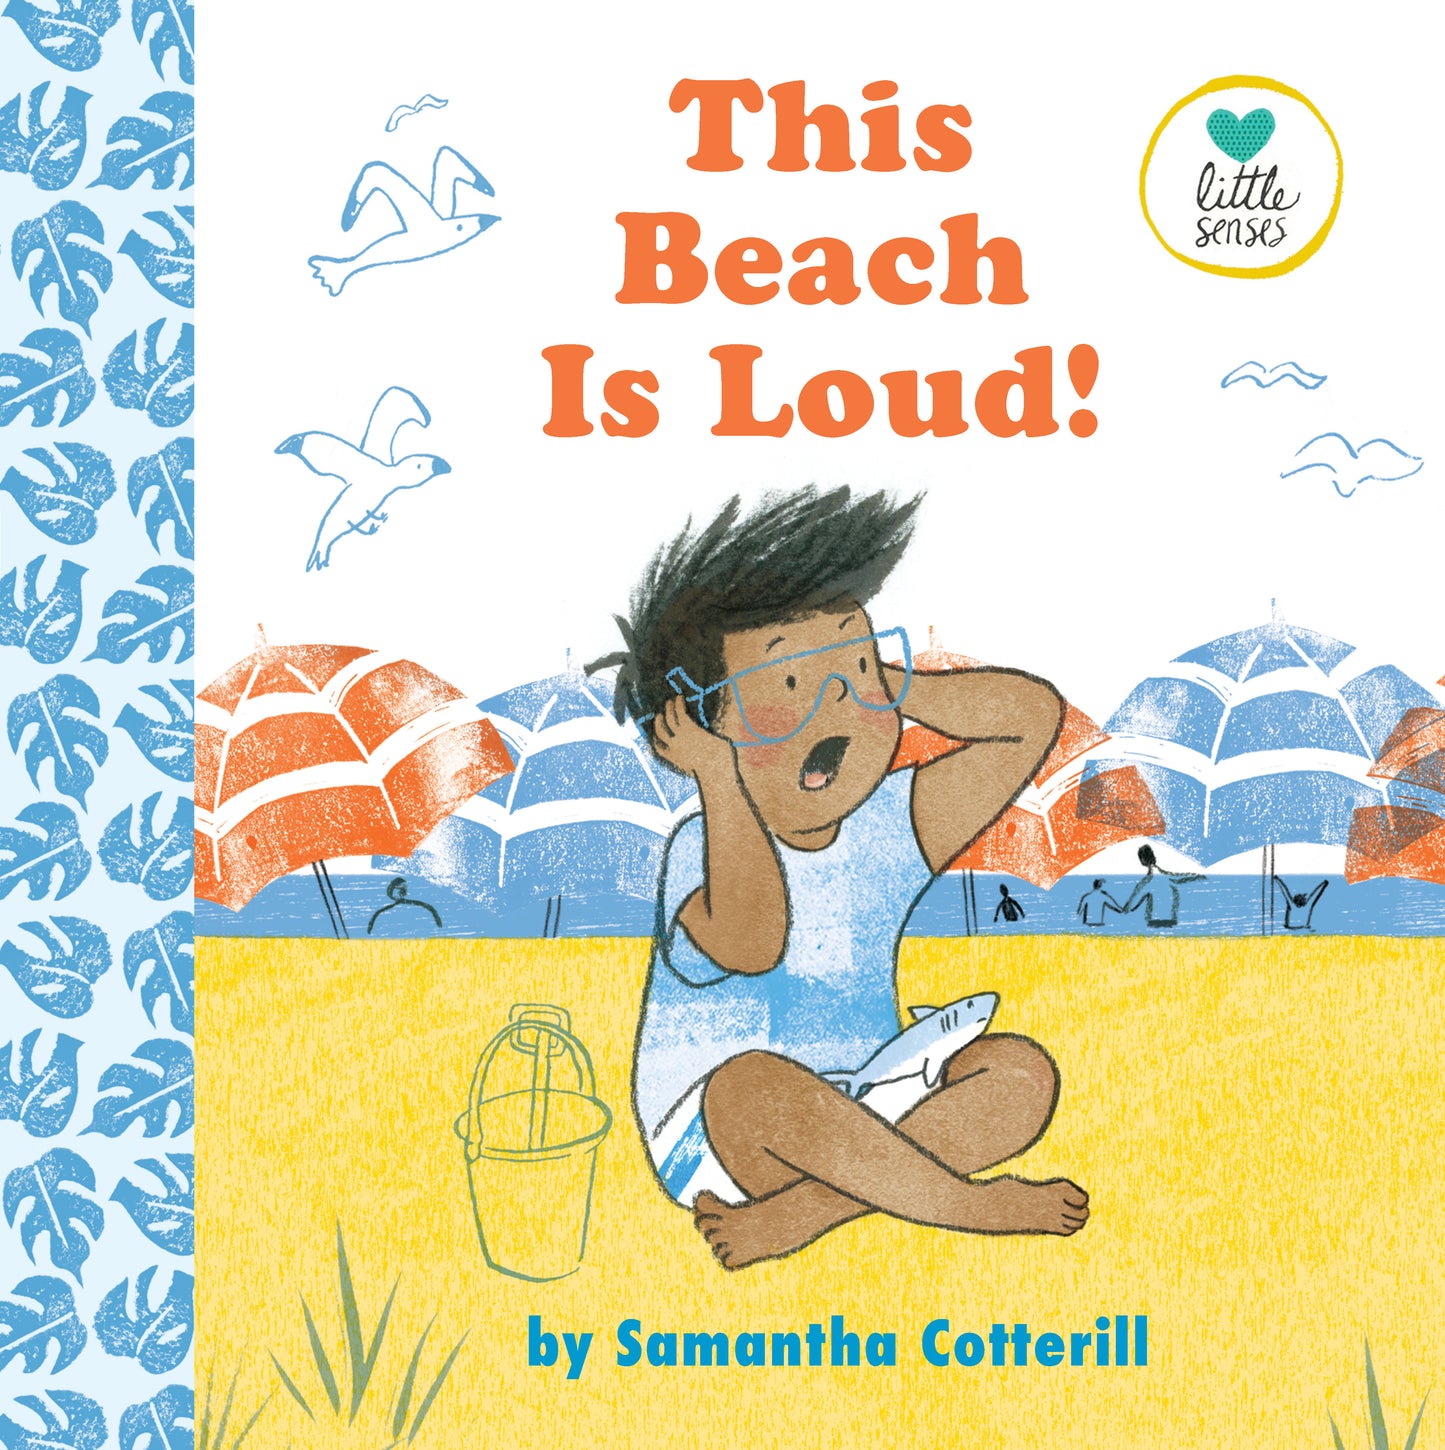 The Beach Is Loud by Samantha Cotterill.  A young boy sits in the sand on the beach with a surprised look on his face, his hands covering his ears. 